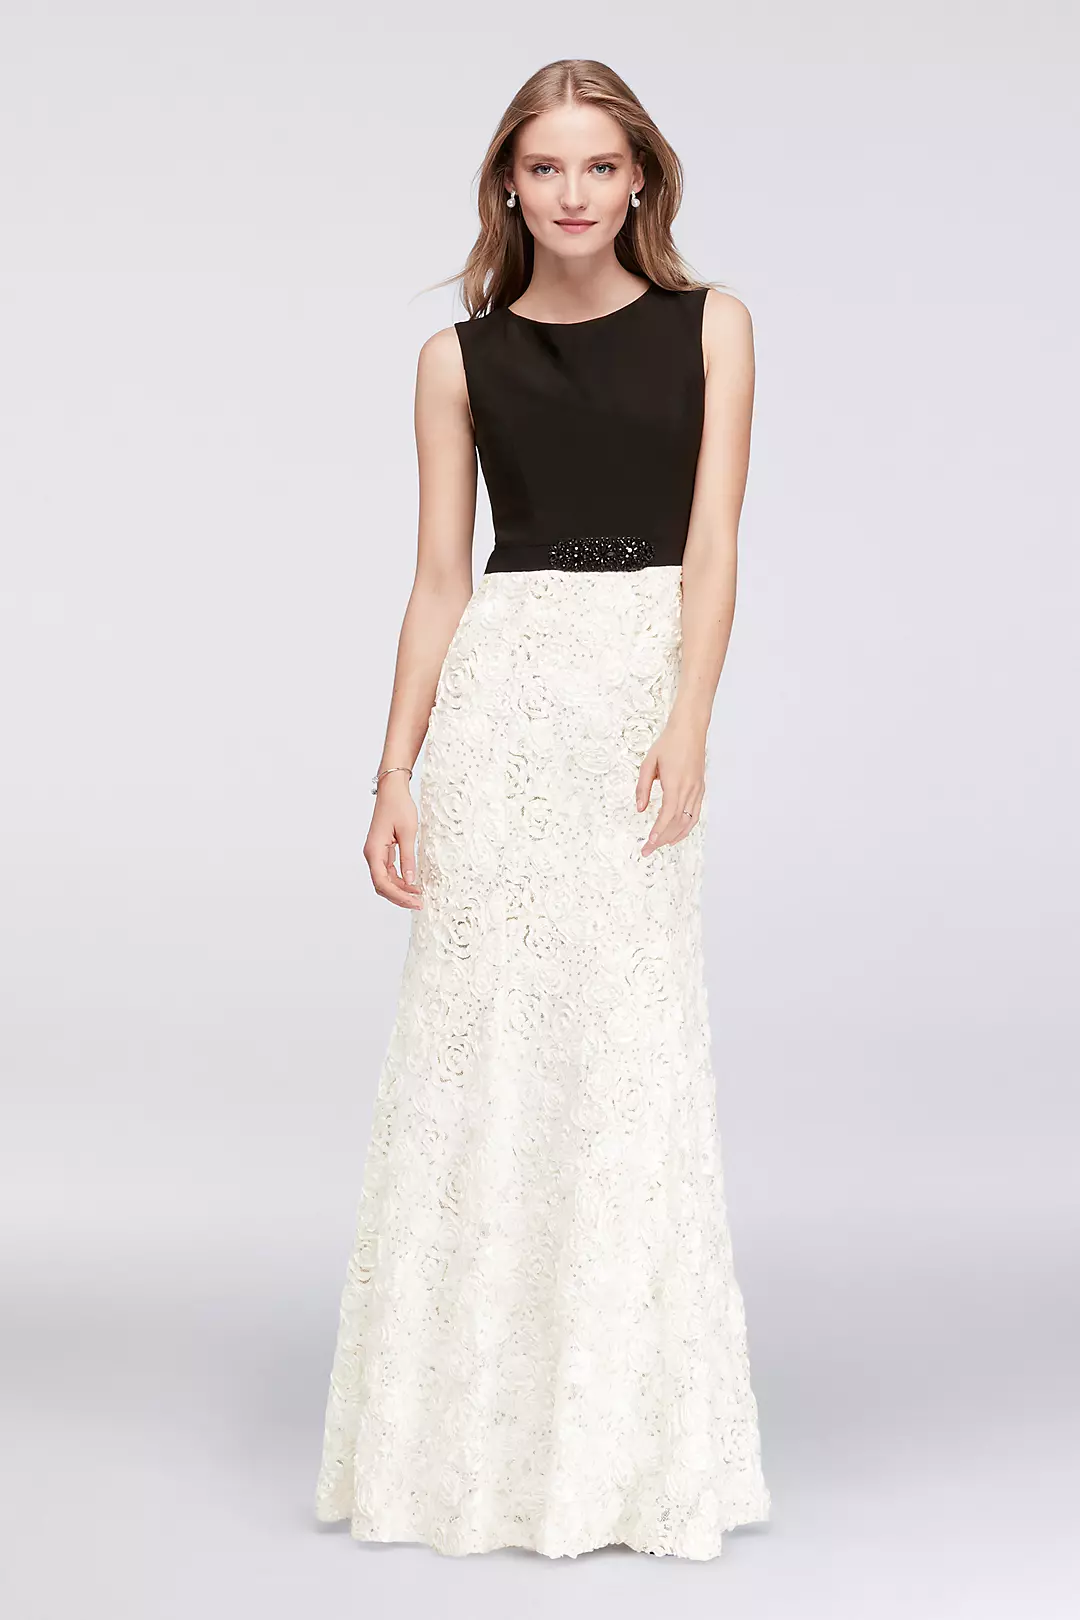 Rosette Lace A-Line Dress with Beaded Waist Image